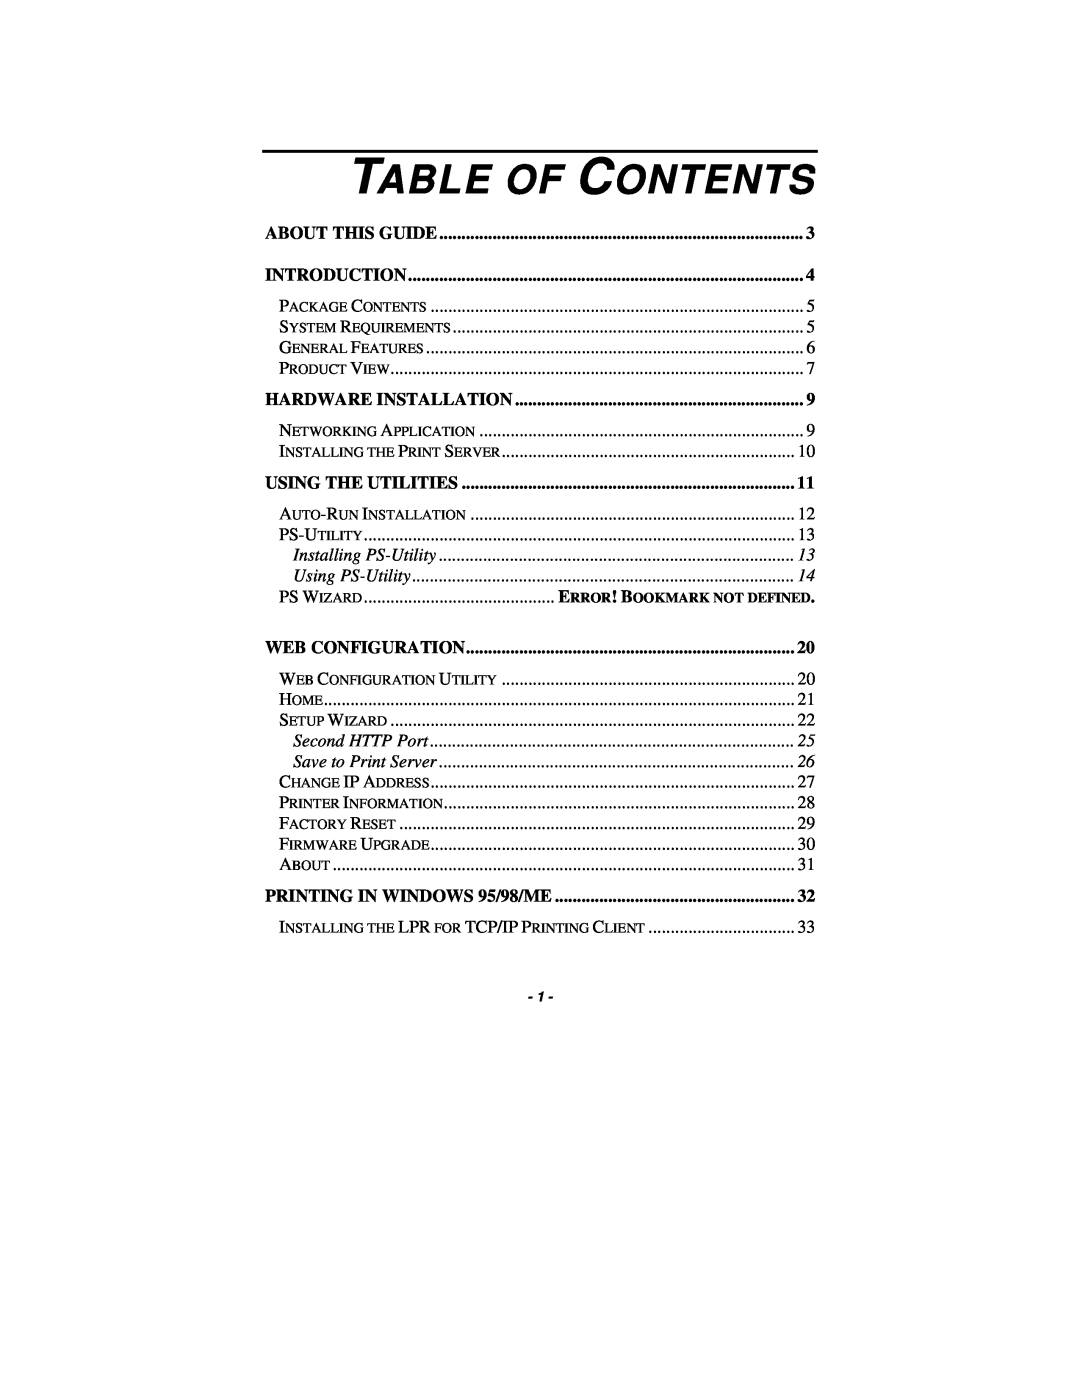 TRENDnet TE100-P1P manual Table Of Contents, About This Guide, Introduction, Hardware Installation, Using The Utilities 